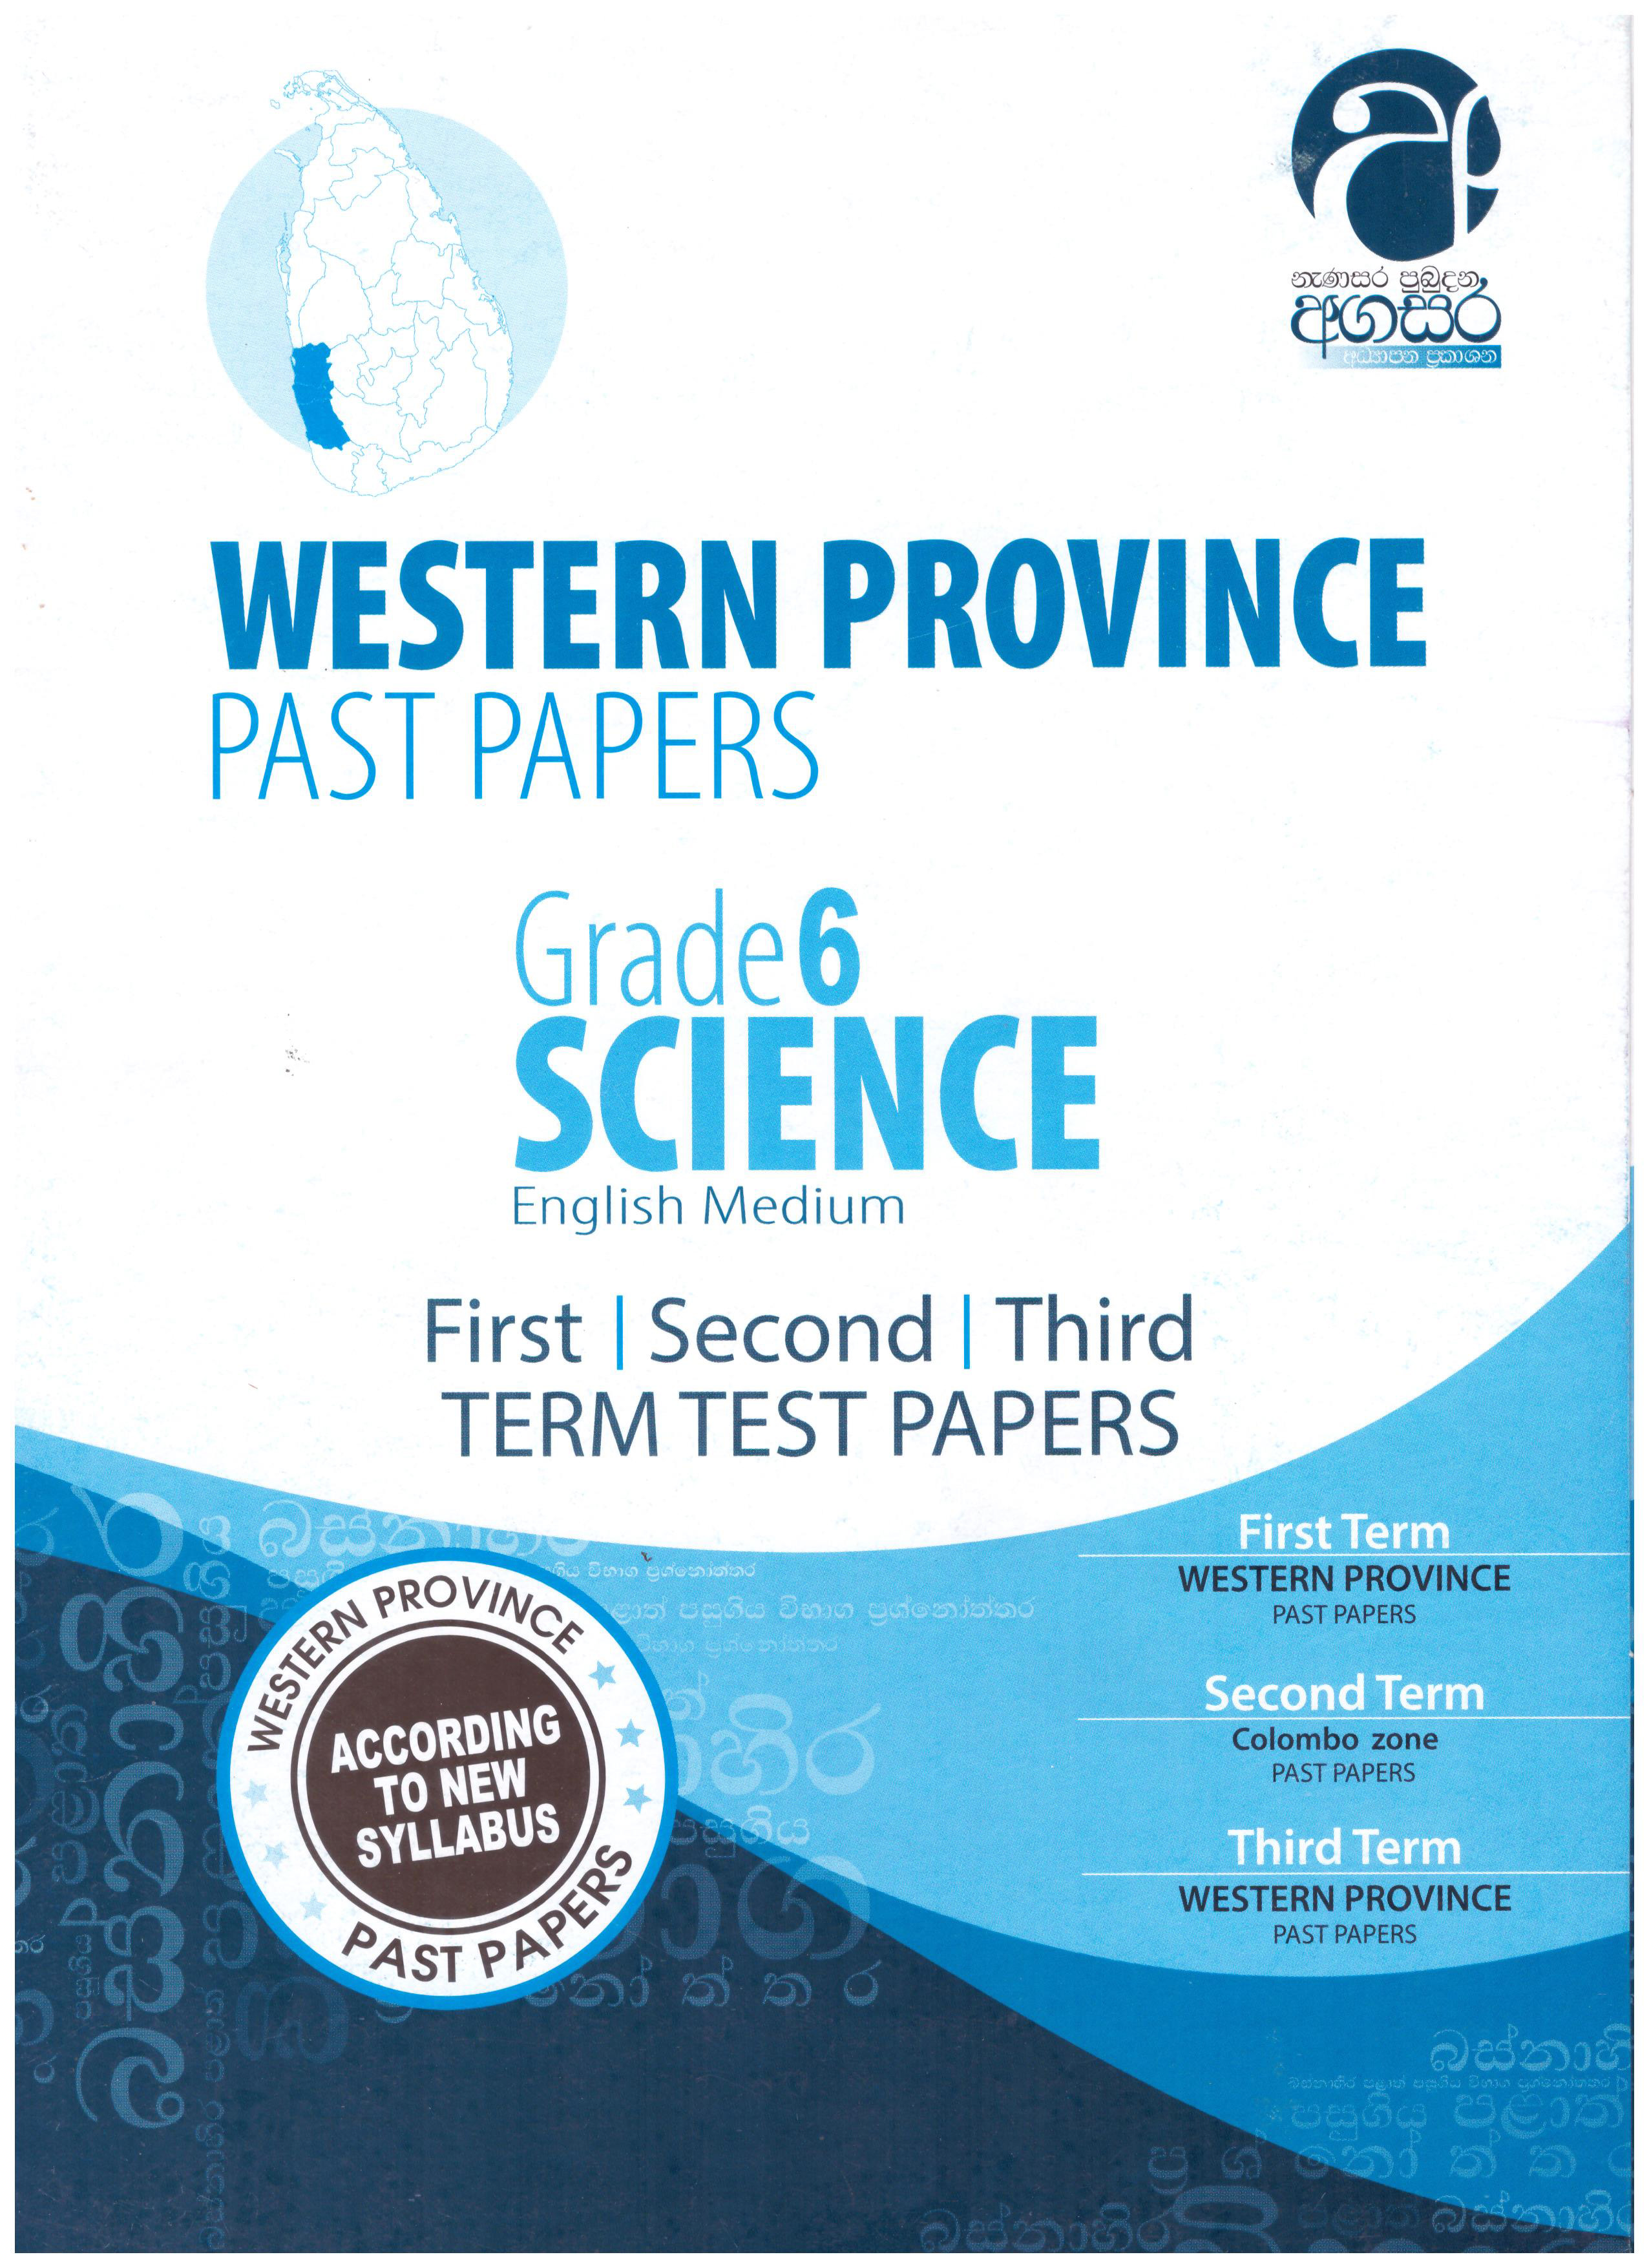 Western Province Past Papers Grade 6 Science (English Medium)